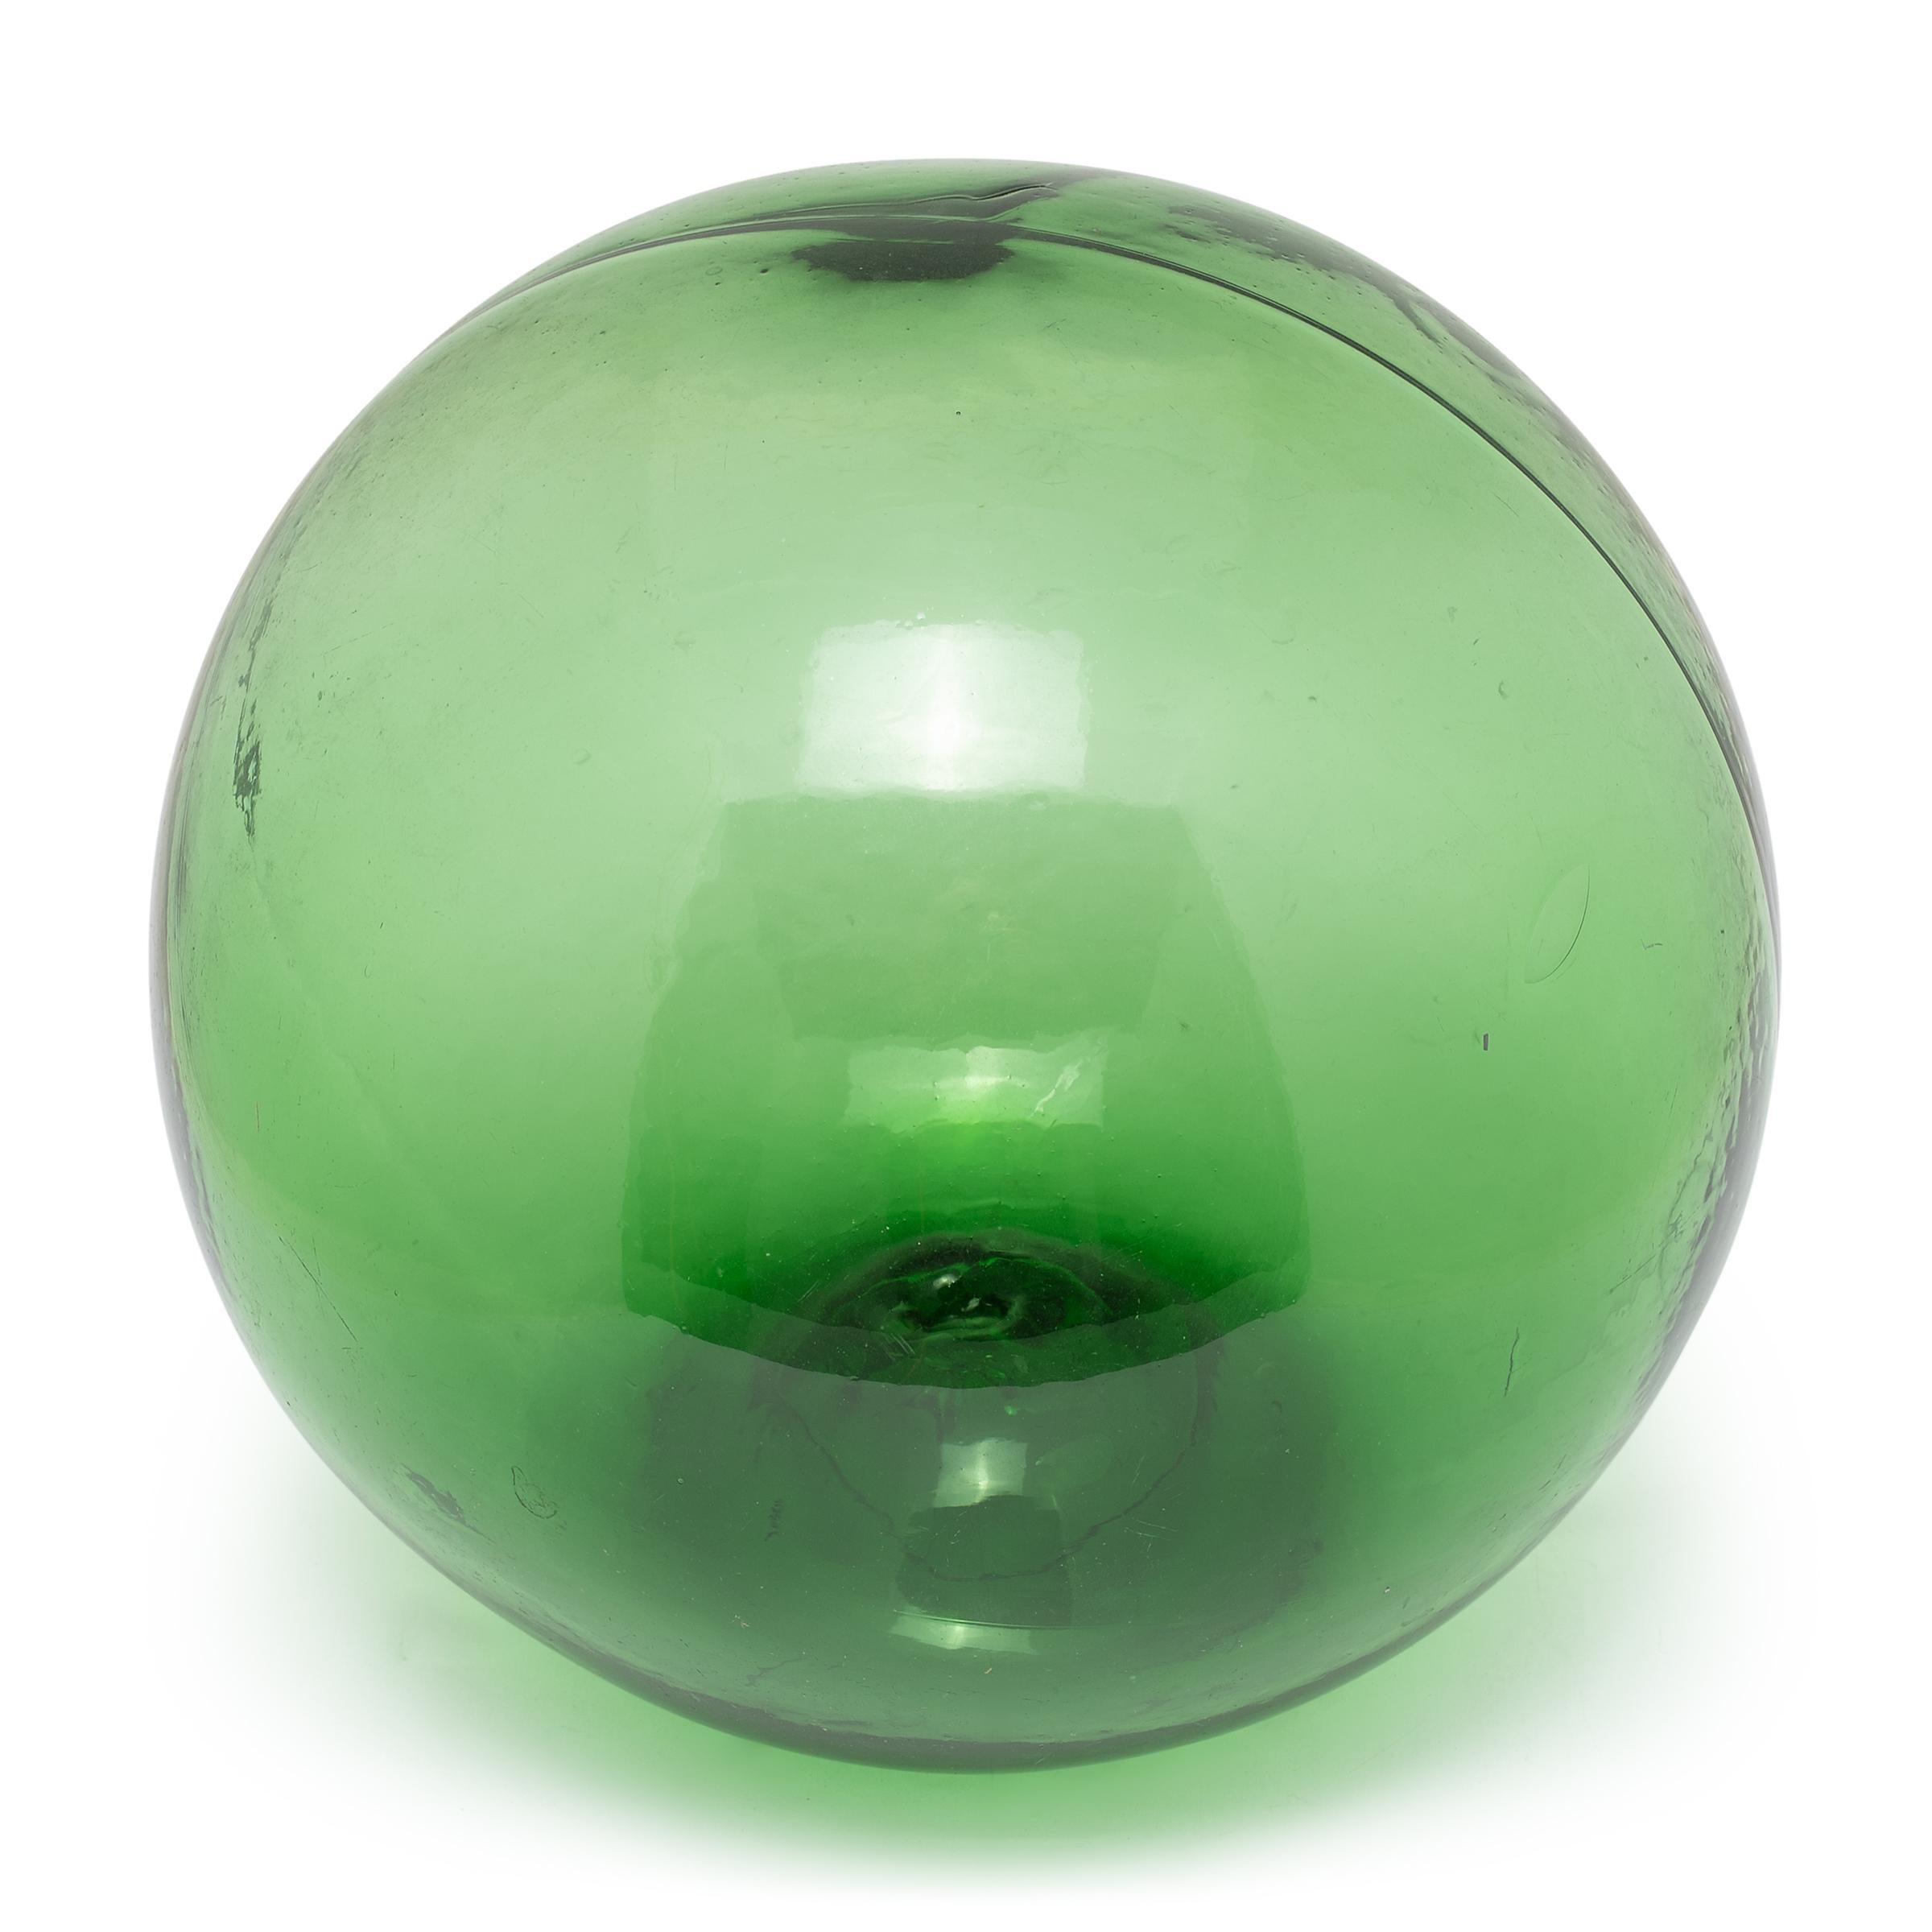 This beautiful green sphere is an early 20th century glass float used by fishermen to keep their fishing nets or droplines afloat in the ocean. The hollow float would have been encased by a rope netting and used just like a modern buoy. Because